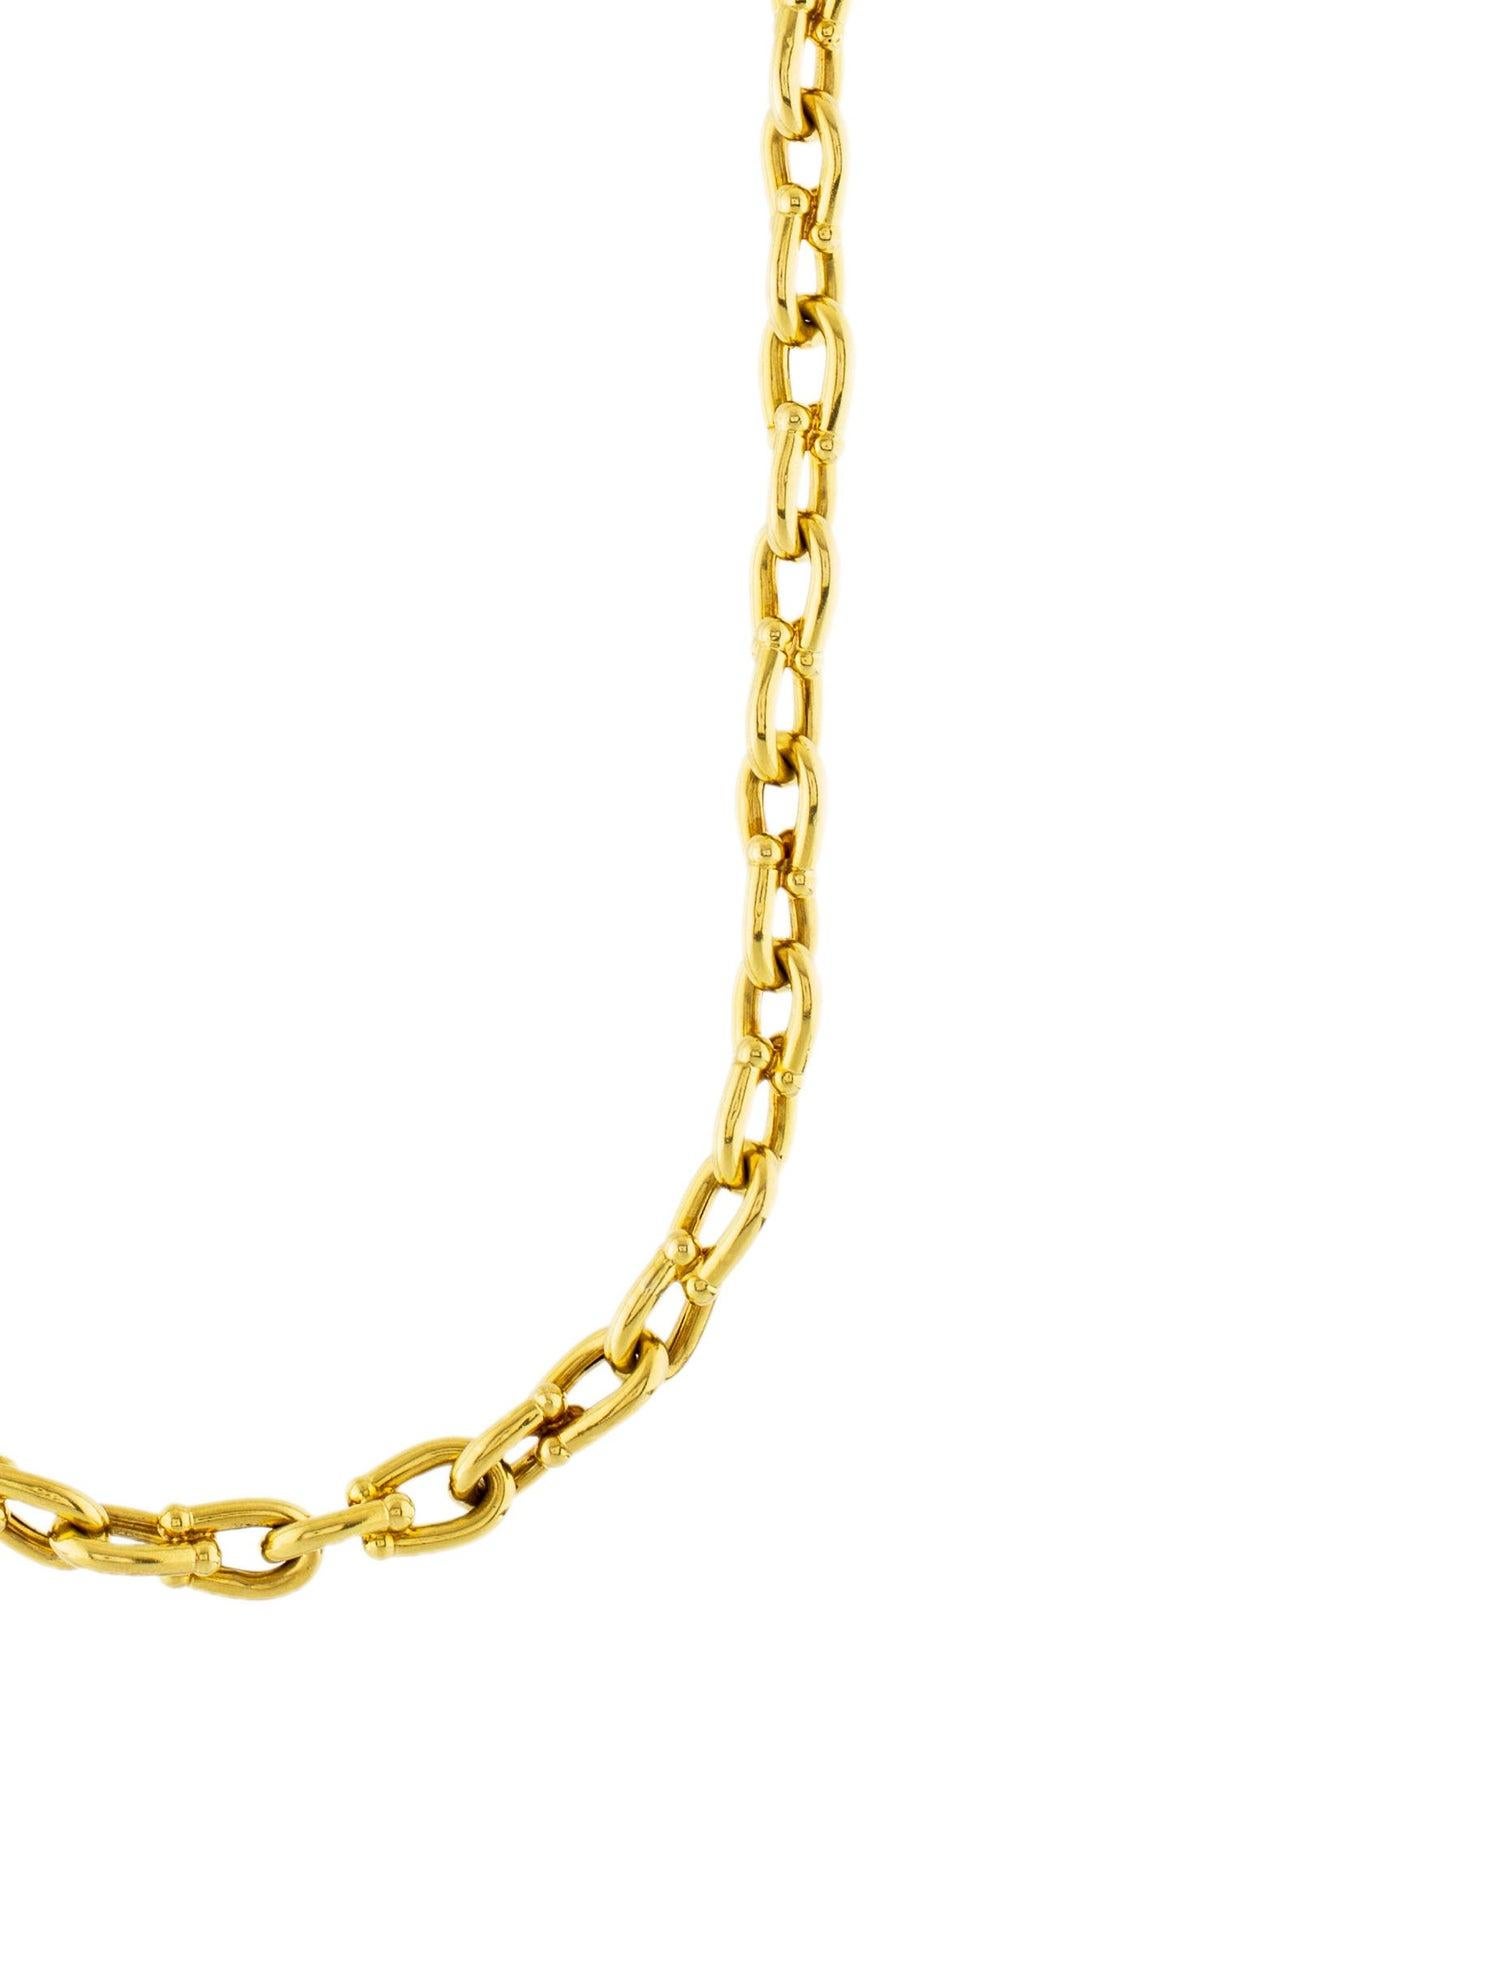 Description
18K yellow gold Cartier Horseshoe chain-link necklace featuring a high polish finish throughout and hinged clip closure.

Metal Type: 18K Yellow Gold
Hallmark: 18K, Designer Signature, Serial Number
Signature: Cartier 15****
Location: